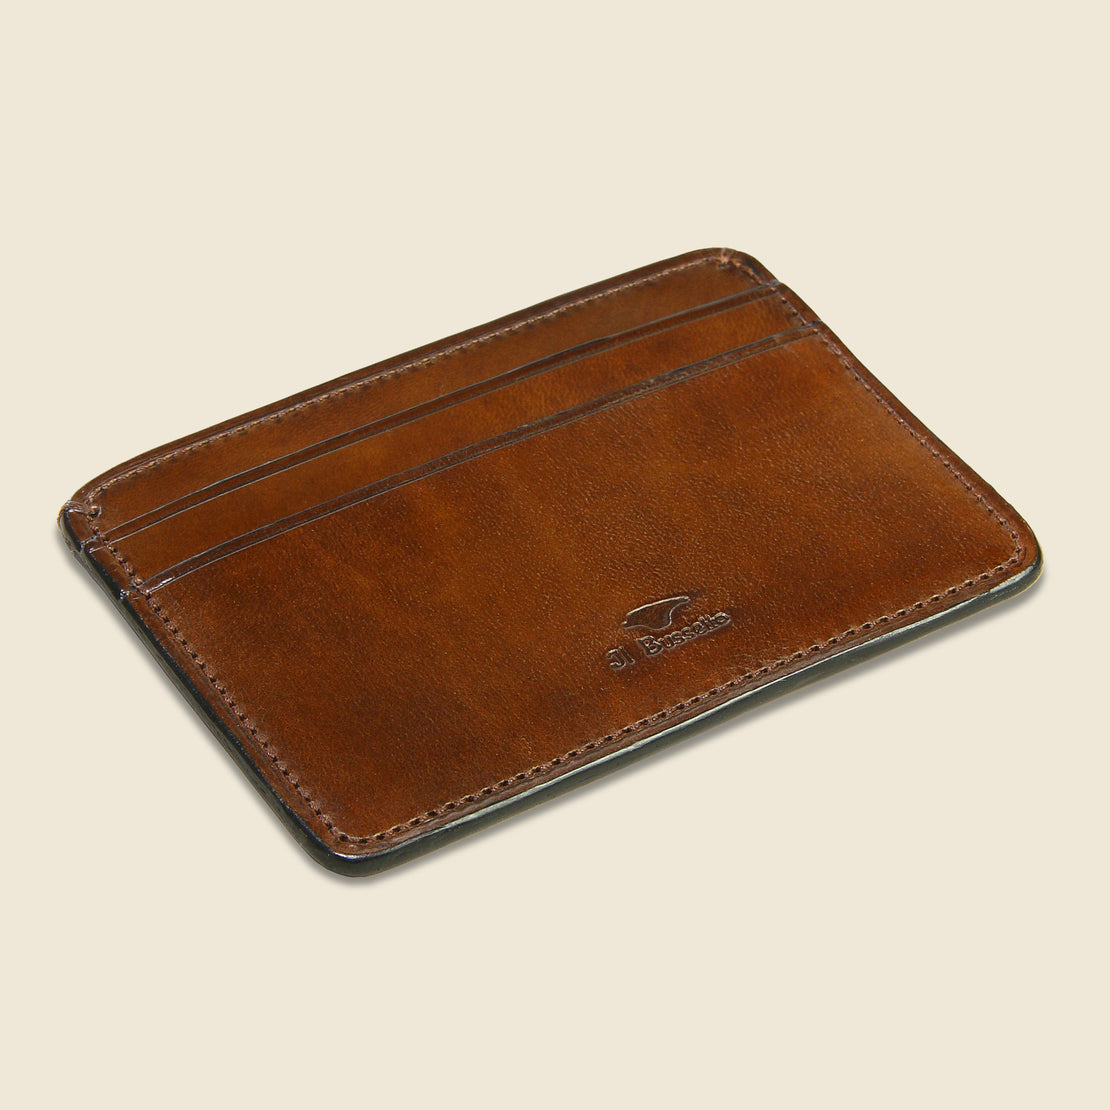 Credit Card Case - Dark Brown - Il Bussetto - STAG Provisions - Accessories - Wallets